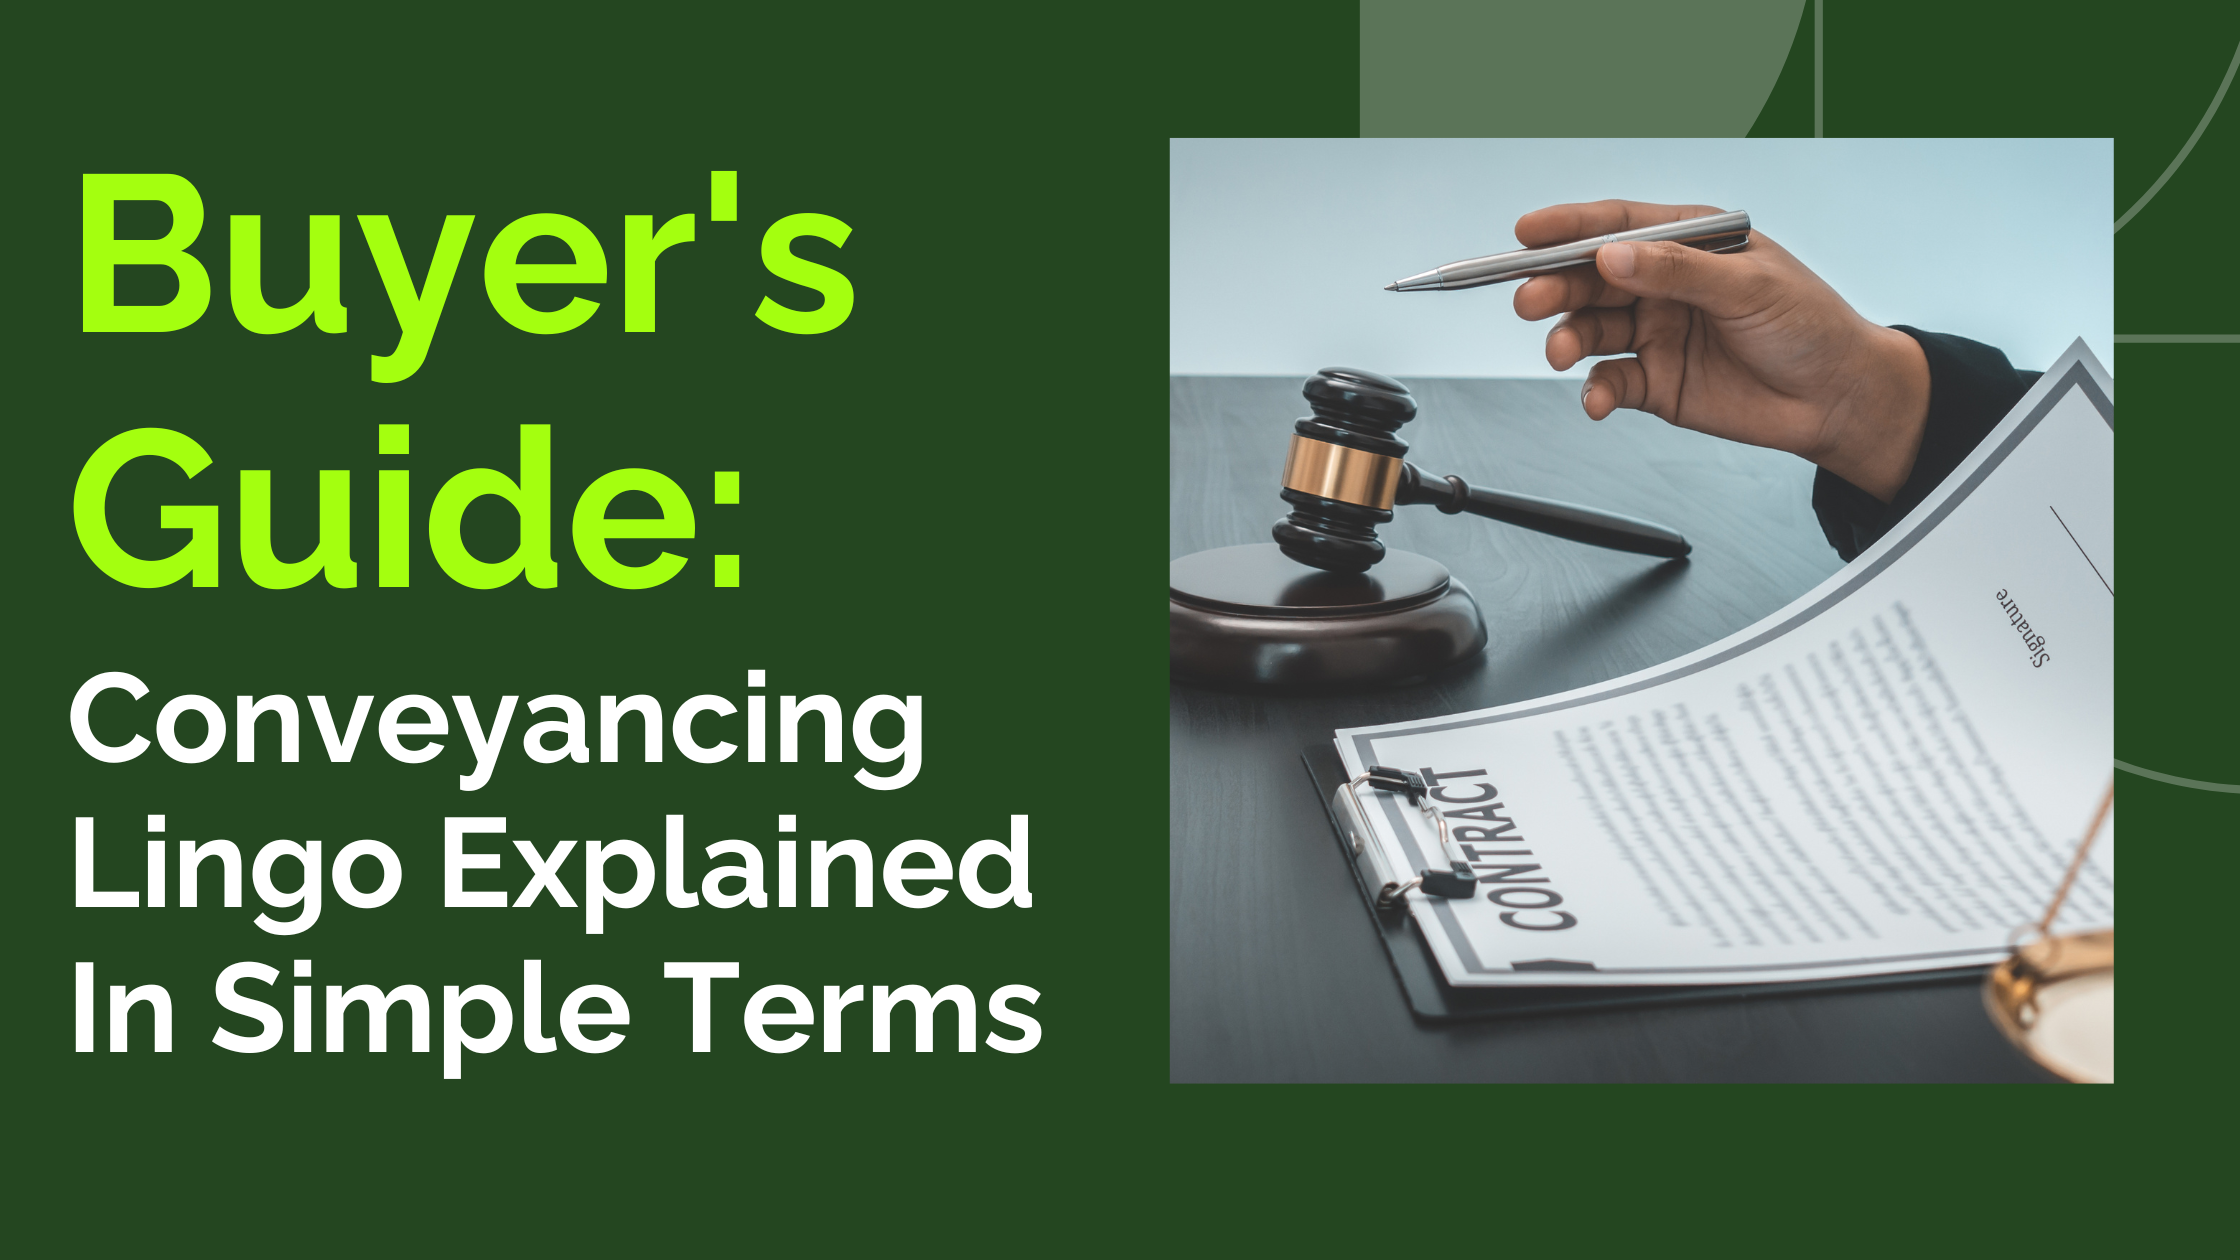 Buyers Guide to Conveyancing Lingo Explained in Simple Terms